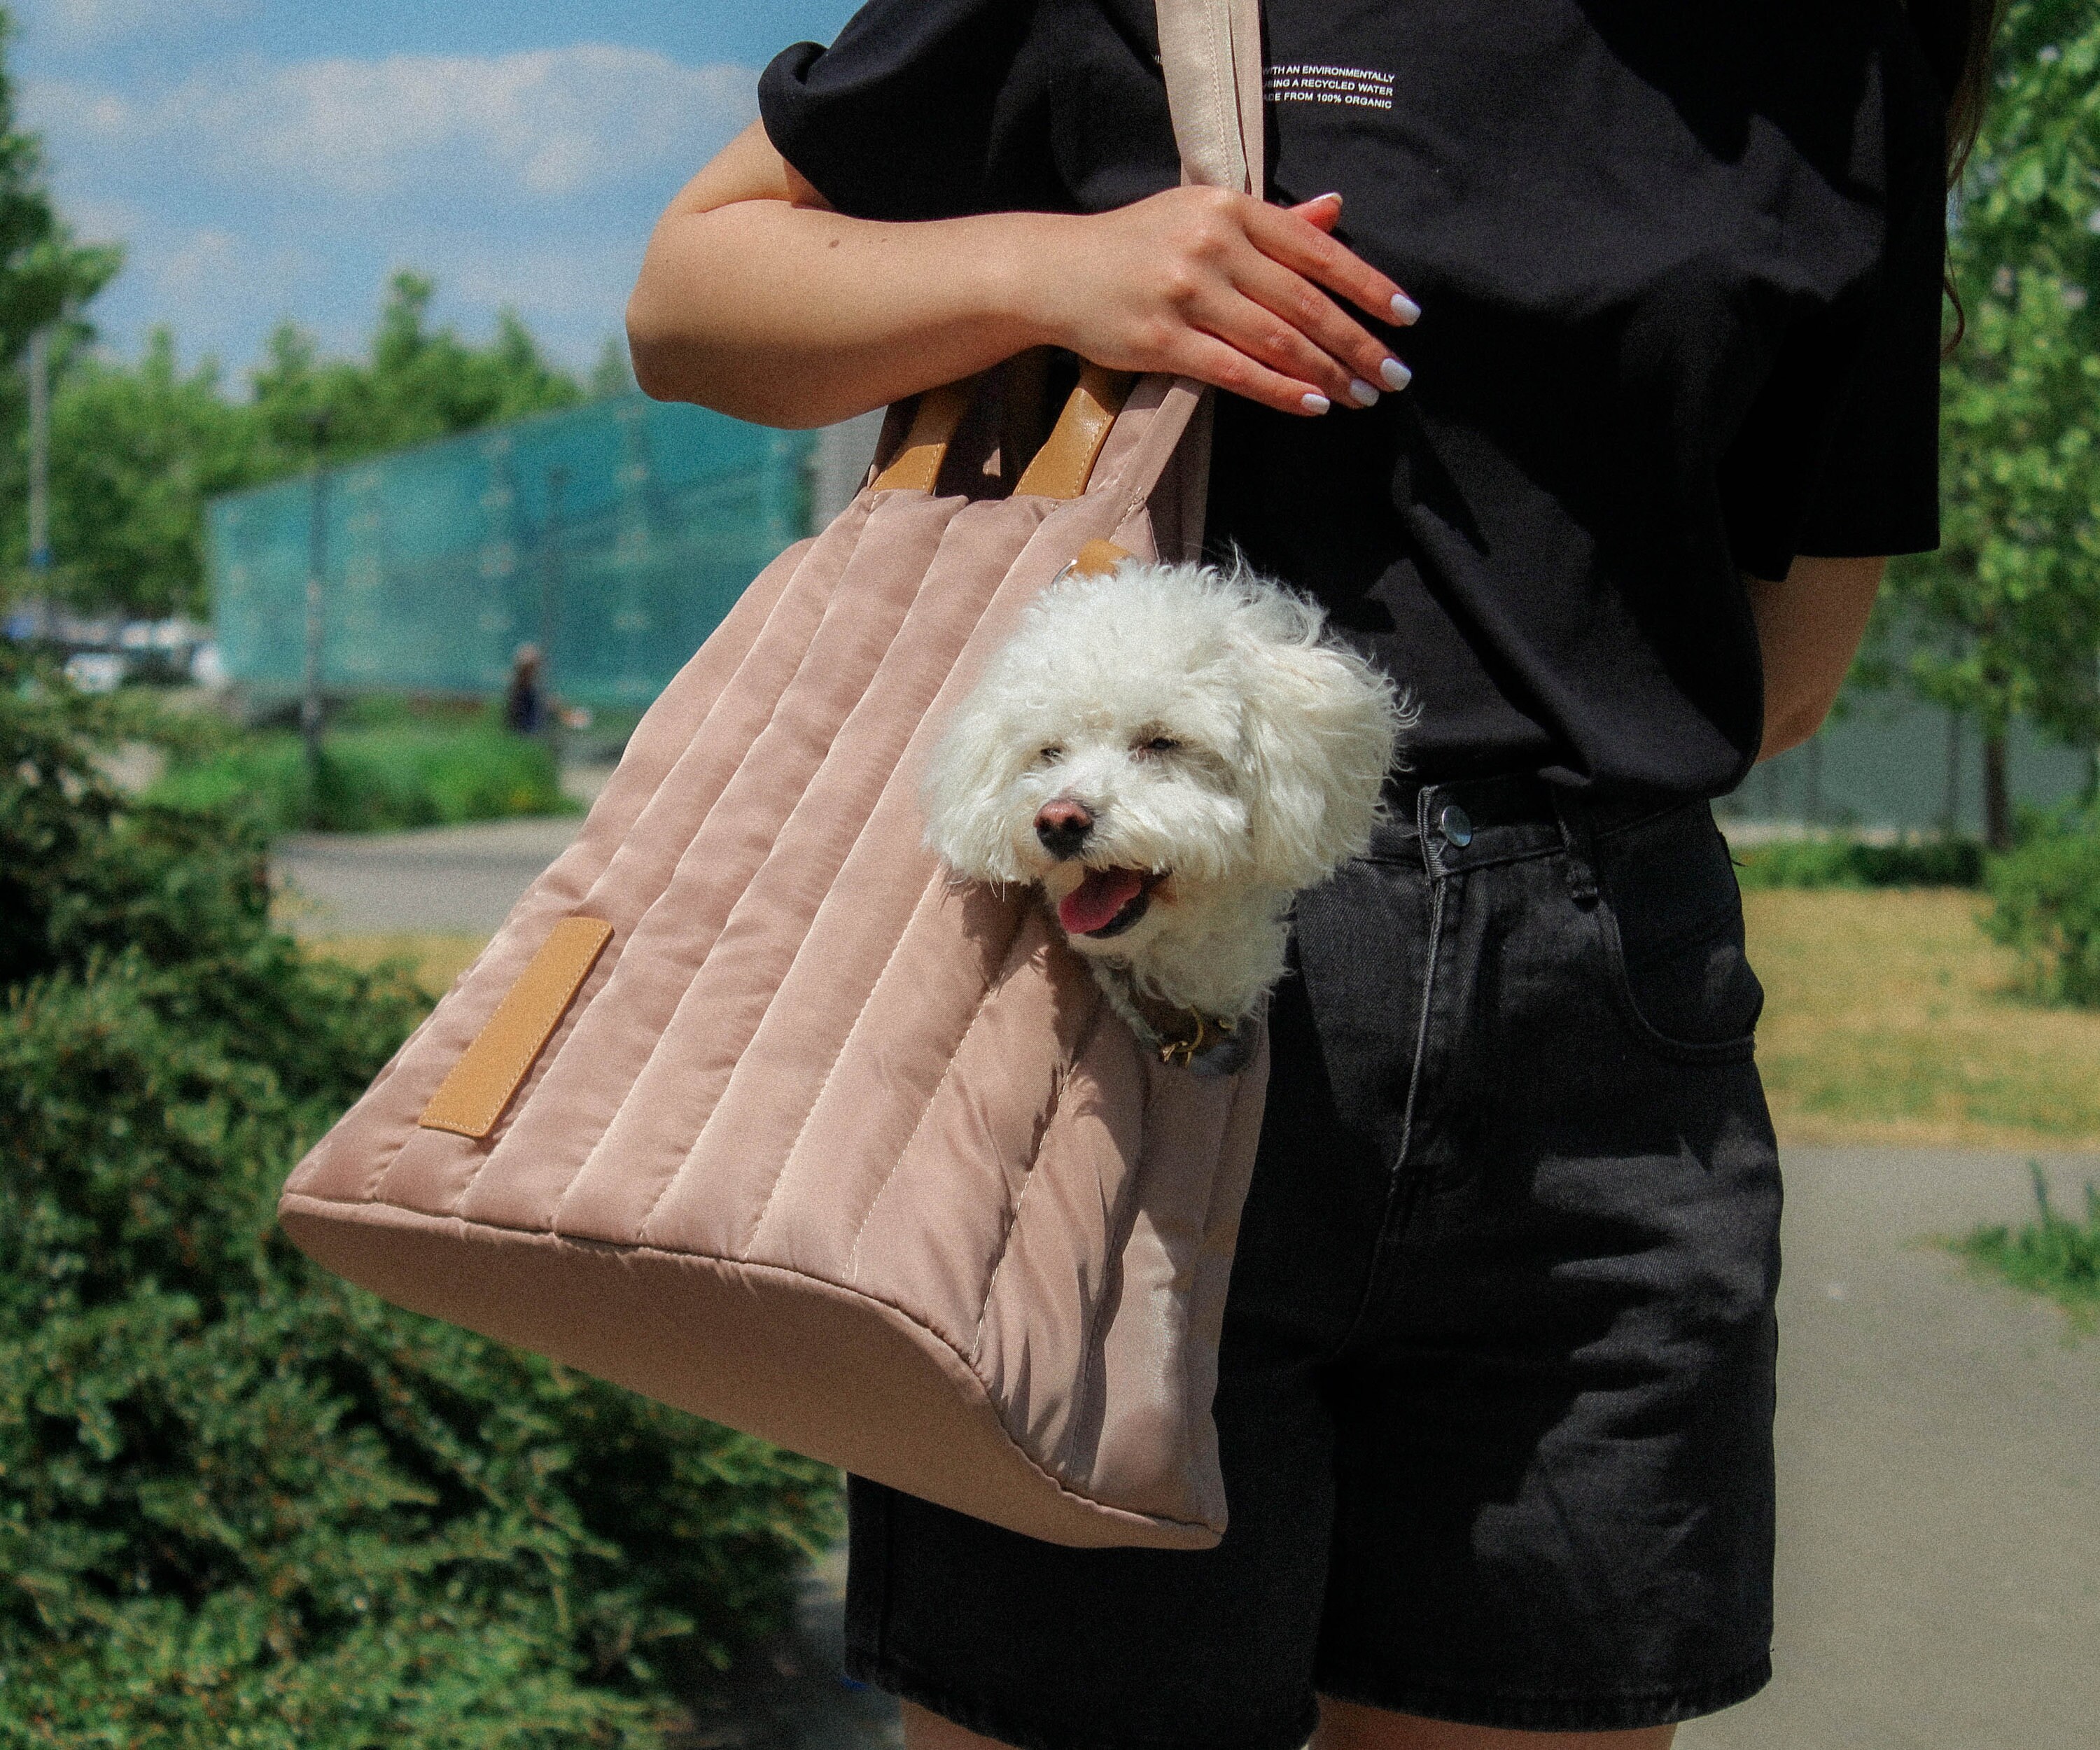 LeerKing Pet Carrier Purse Tote Bag Warm Sponge Portable Travel Bag with Leash Hook for Cats Medium Dogs in Winter for Shopping